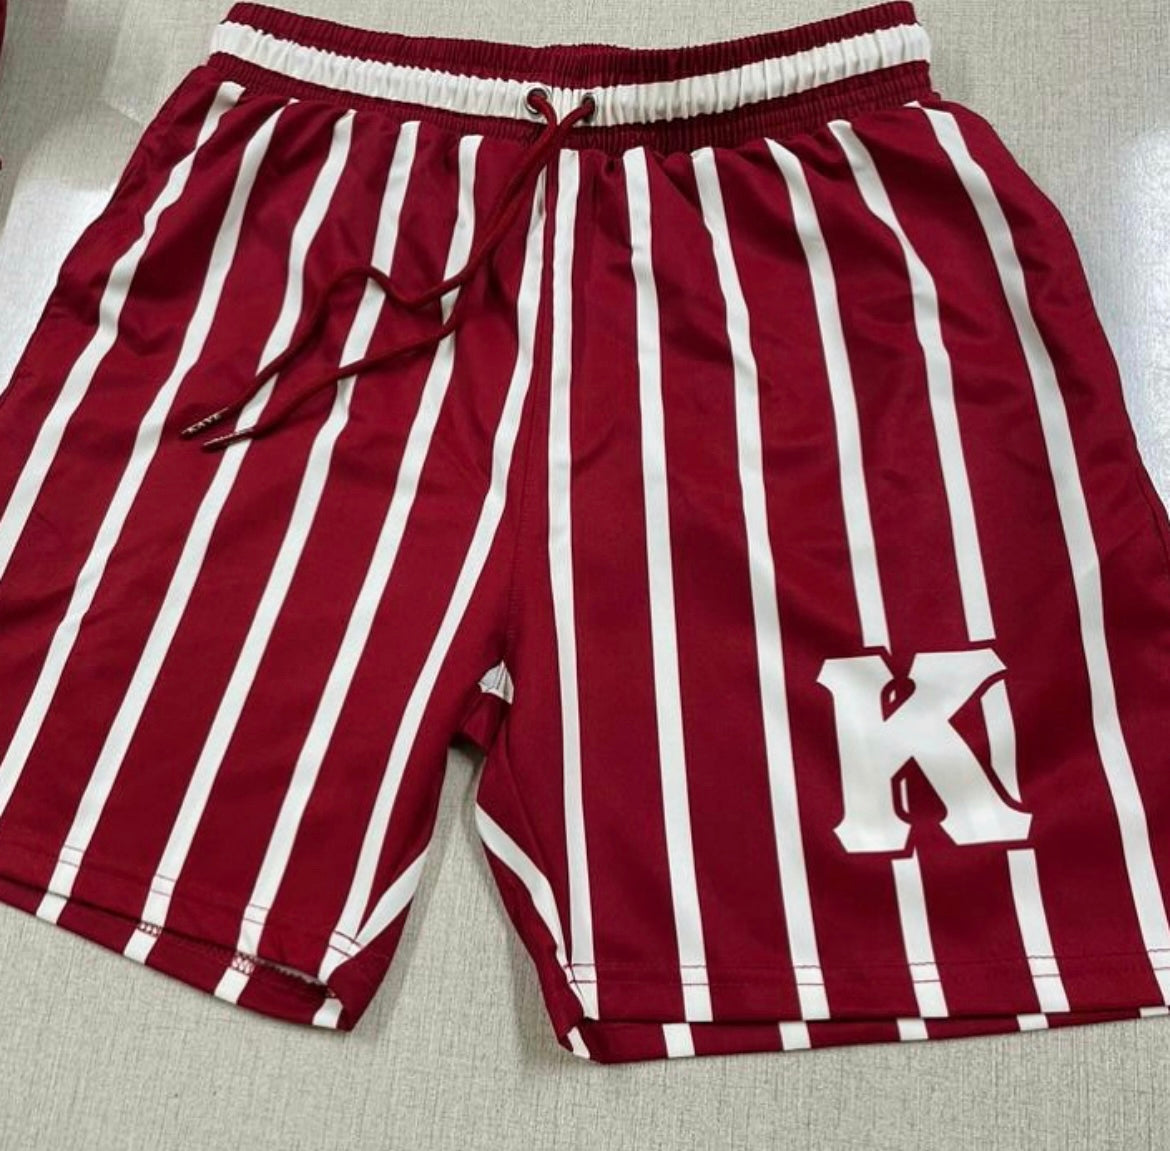 Elevate your summer style with these Kappa Alpha Psi men's swim shorts. Featuring a classic striped pattern and convenient drawstring waist, these swim shorts are the perfect addition to your swimwear collection. Made for men, these swim shorts offer a comfortable fit and are suitable for any beach or poolside adventure.